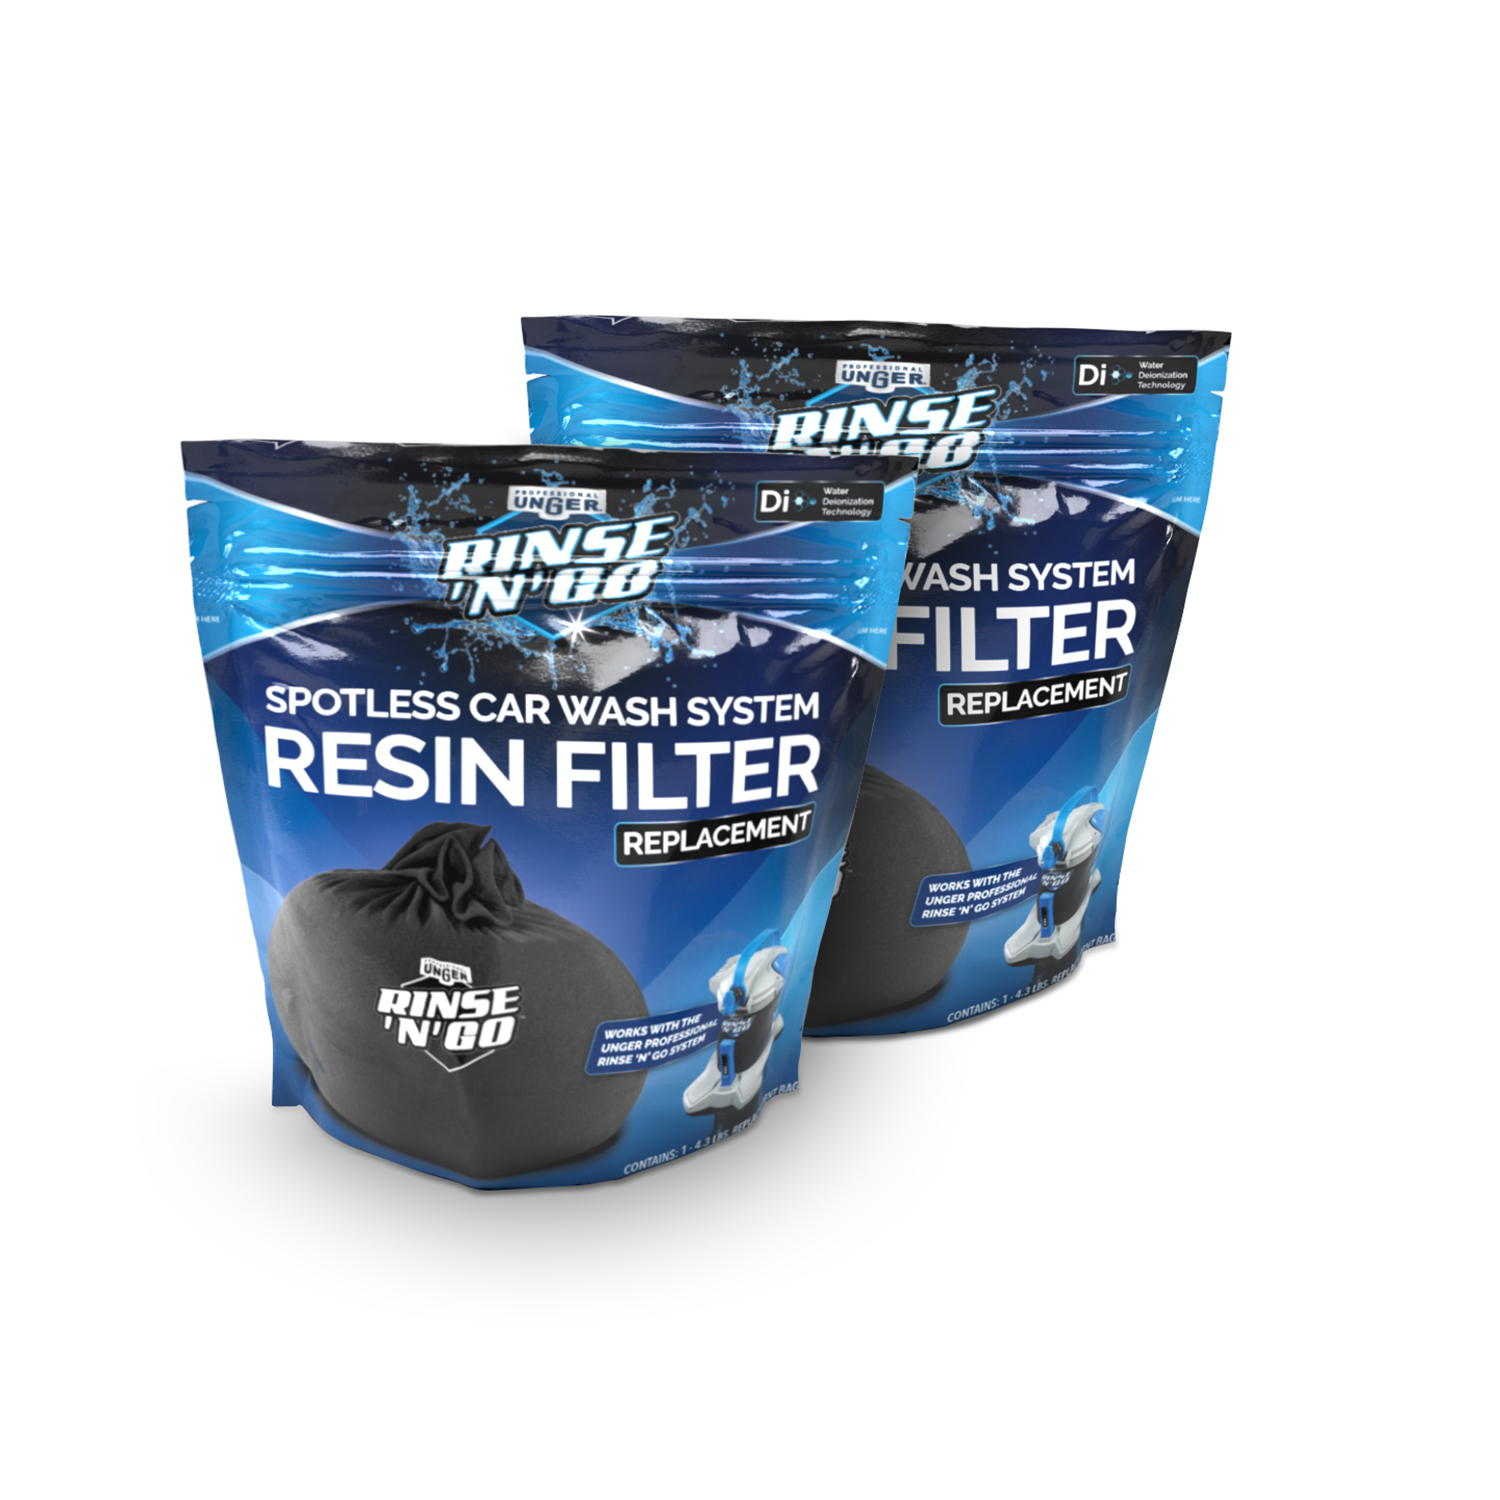 Rinse 'n' Go Replacement Resin Filter | Car Washing Products